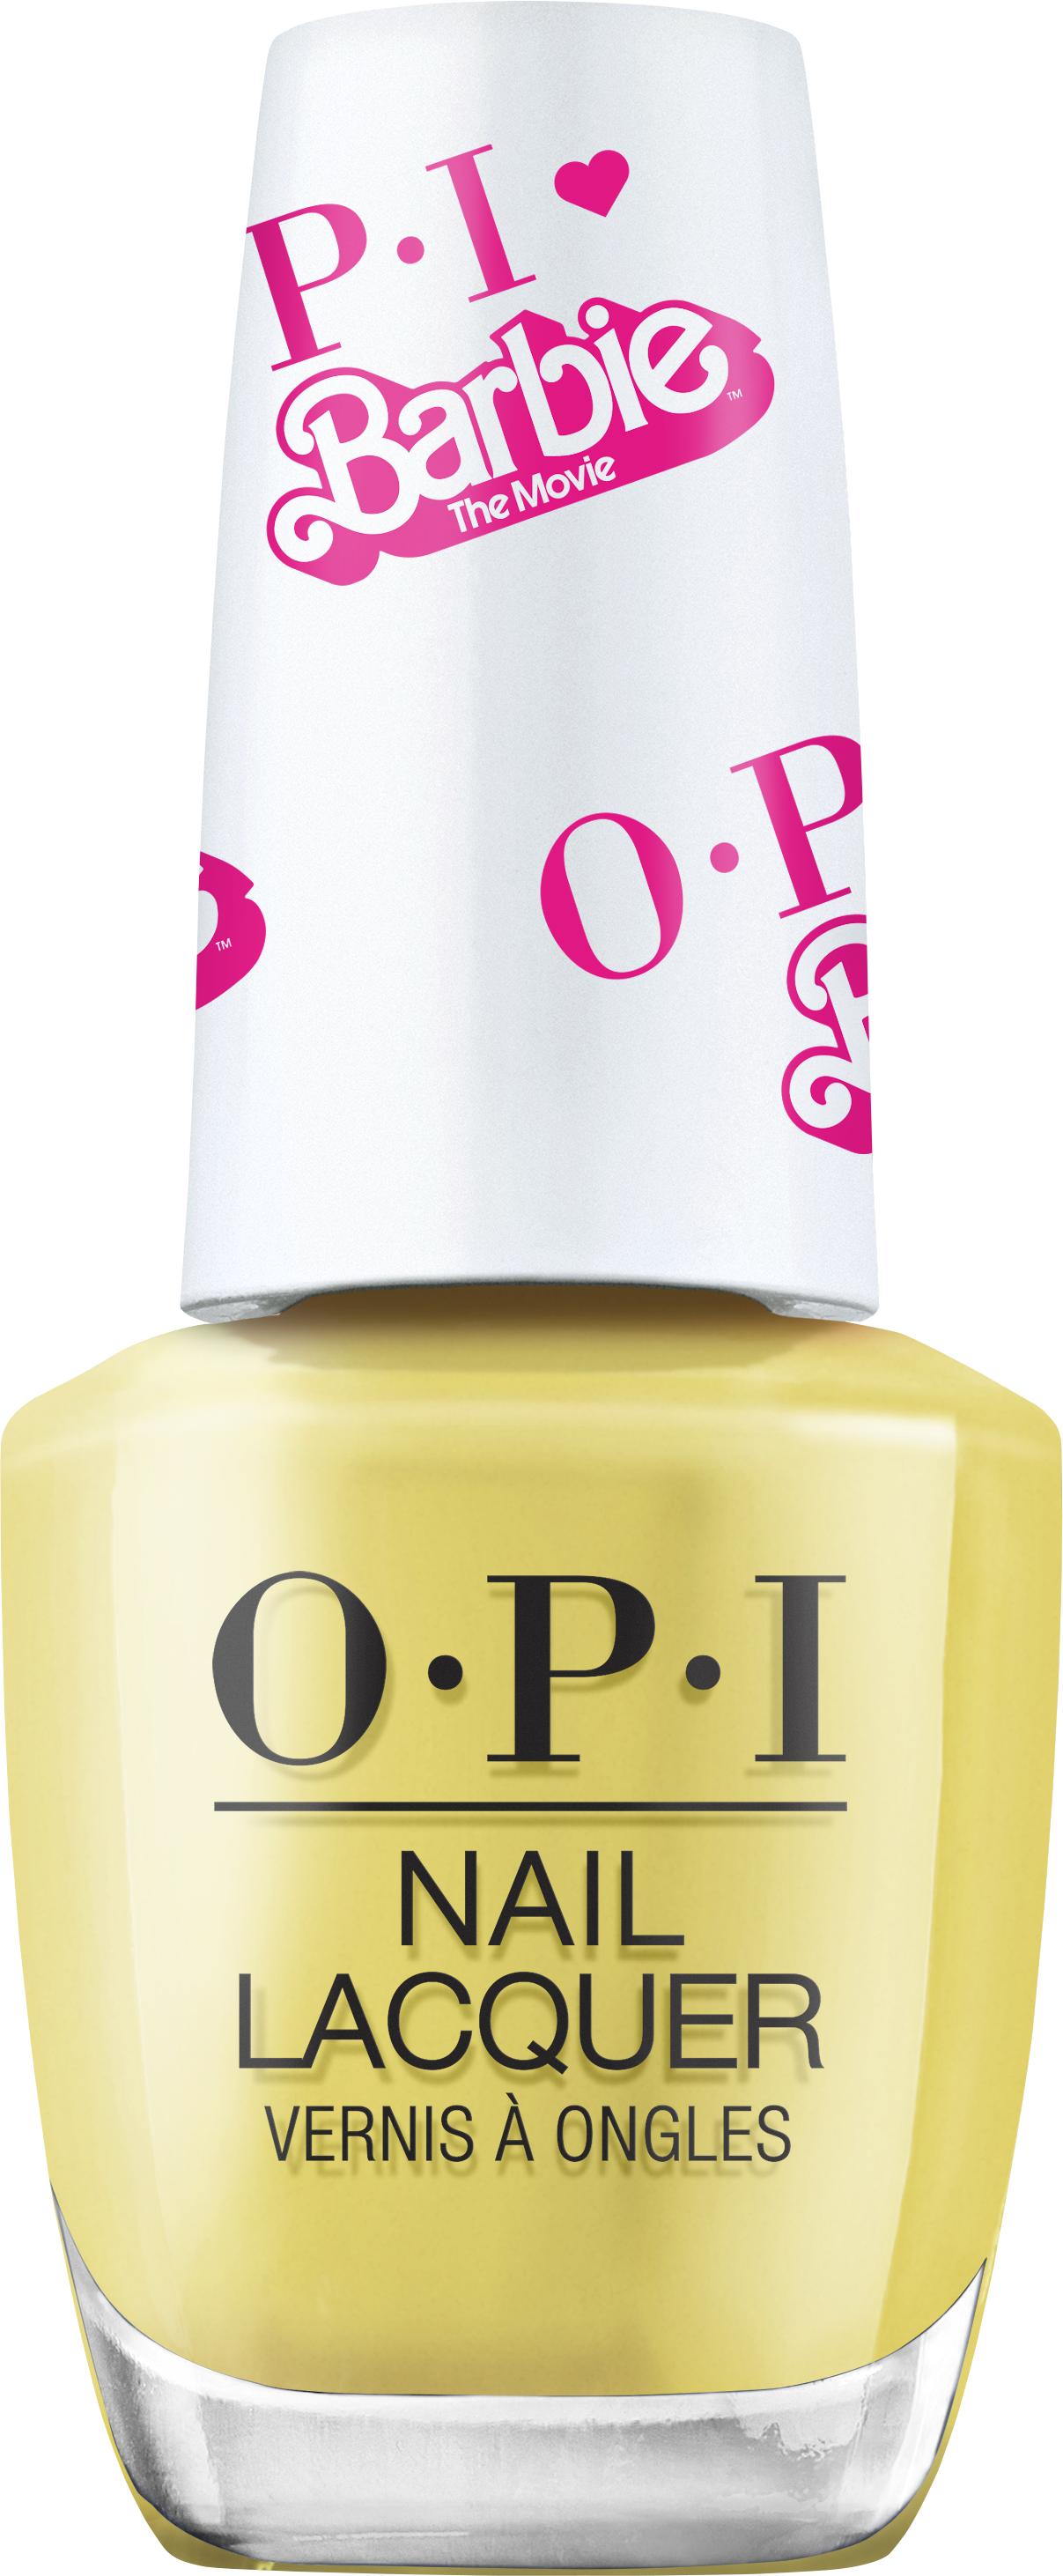 4064665125733 - OPI NAIL LACQUER, OPAQUE CRÈME FINISH YELLOW NAIL POLISH, UP TO 7 DAYS OF WEAR, CHIP RESISTANT & FAST DRYING, OPIXBARBIE LIMITED EDITION COLLECTION, HI KEN, 0.5 FL OZ